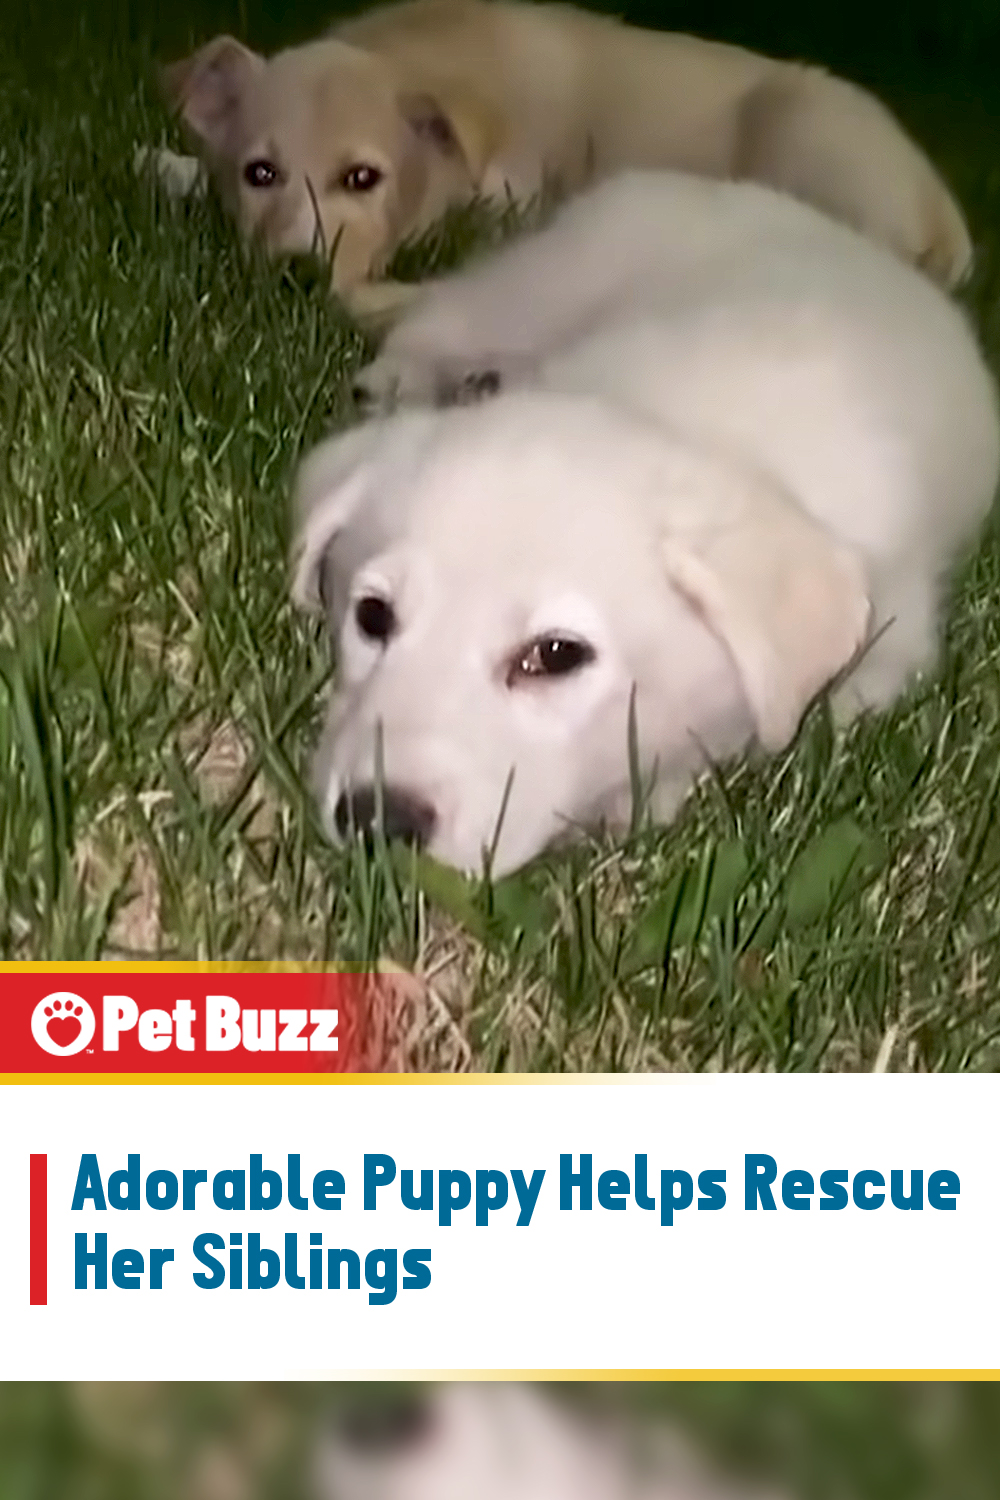 Adorable Puppy Helps Rescue Her Siblings